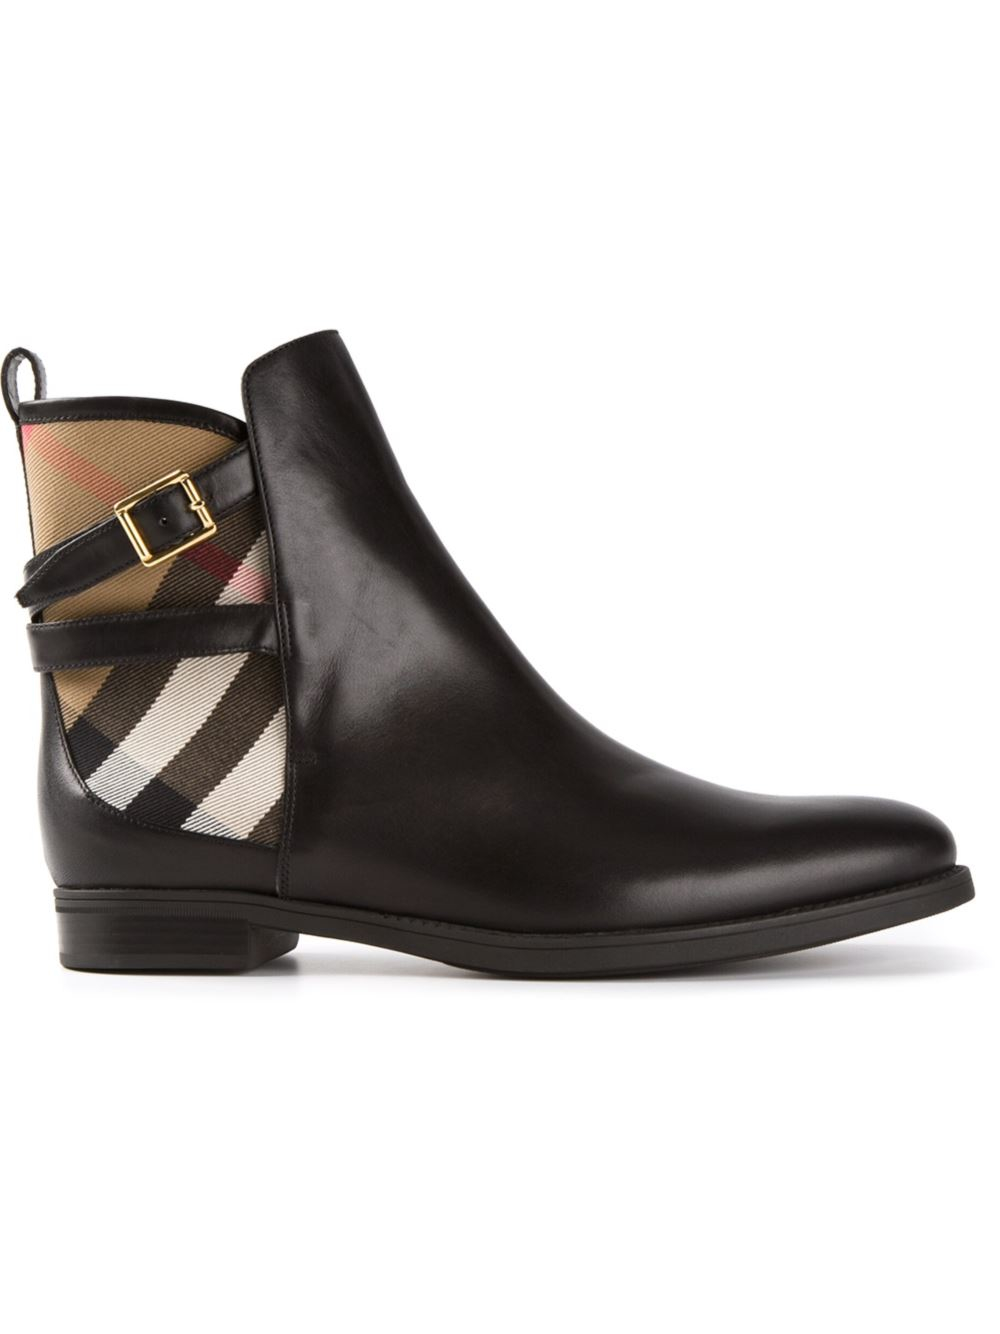 Burberry Leather 'house' Check Ankle Boots in Black | Lyst